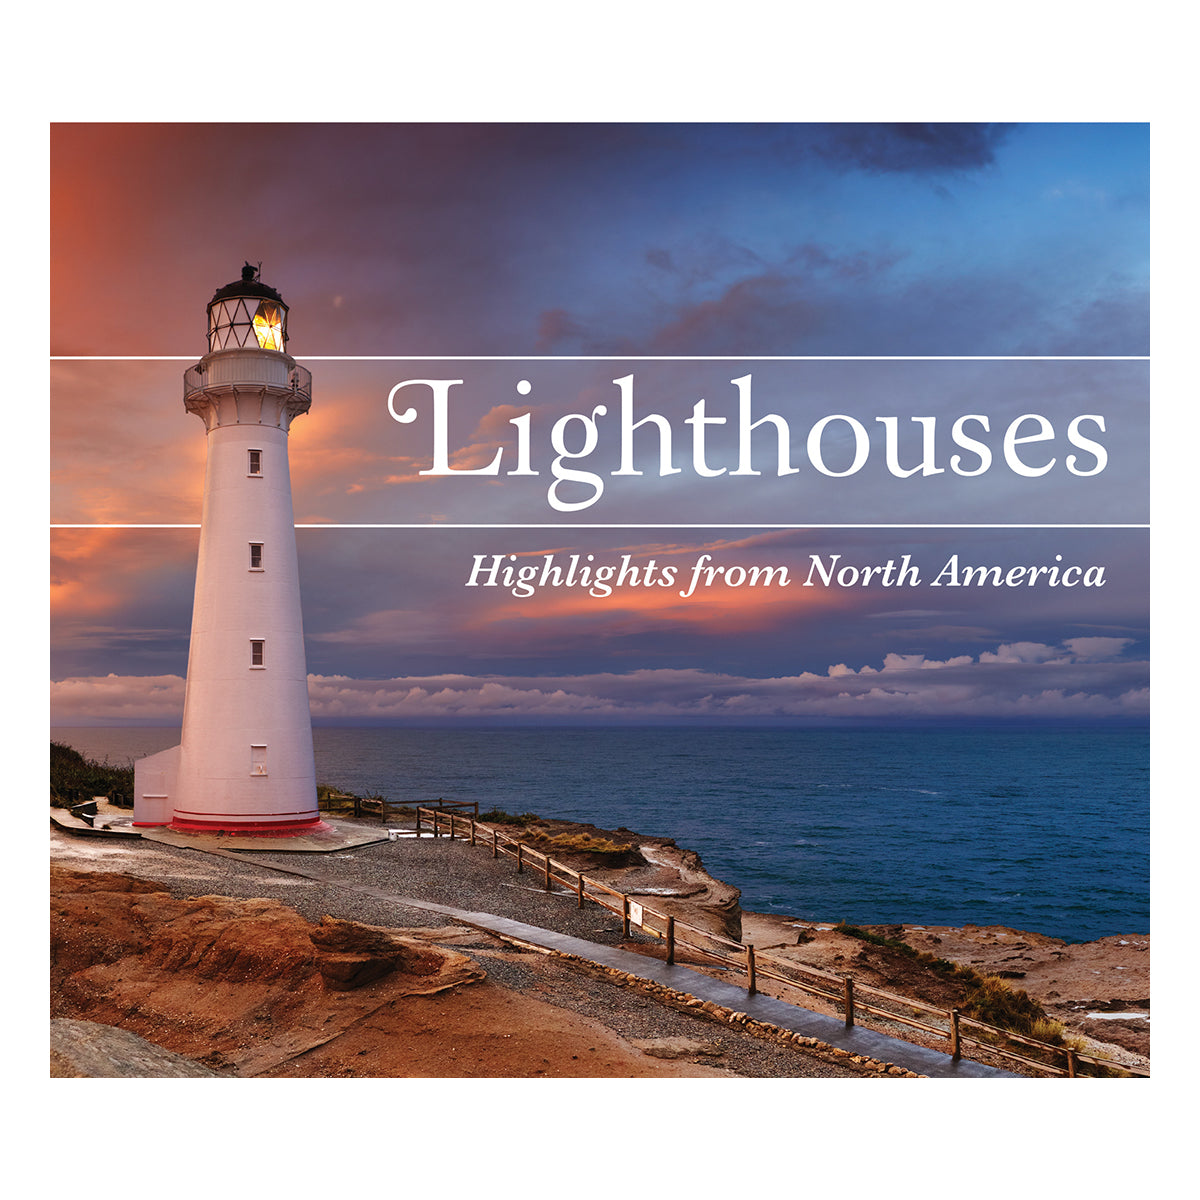 Lighthouses Highlights from North America